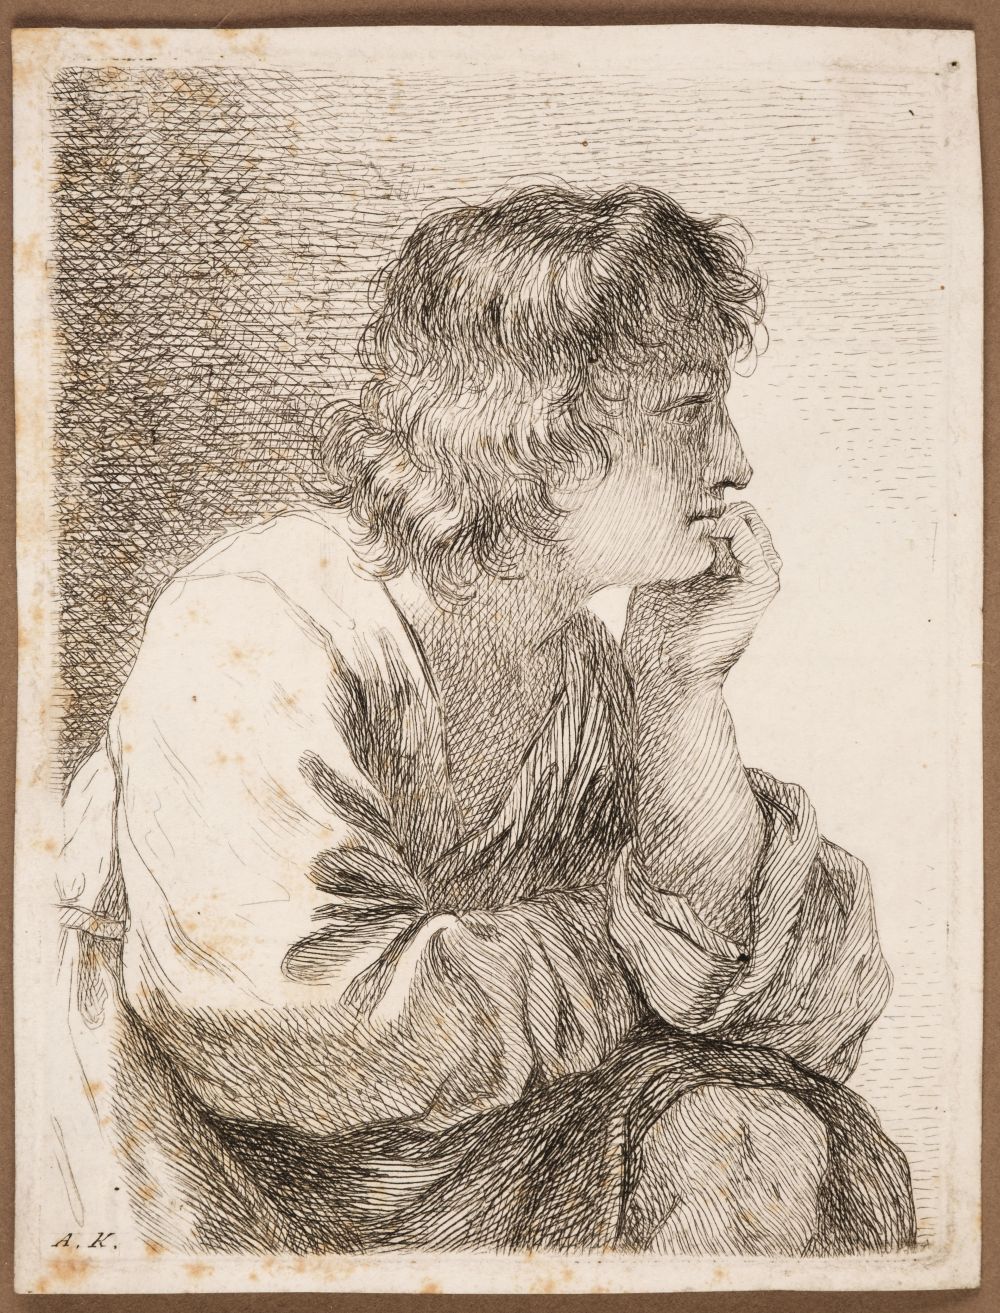 * Kauffman, Angelika (1741-1807). A Young Man Musing, etching, 1762 - Image 2 of 7